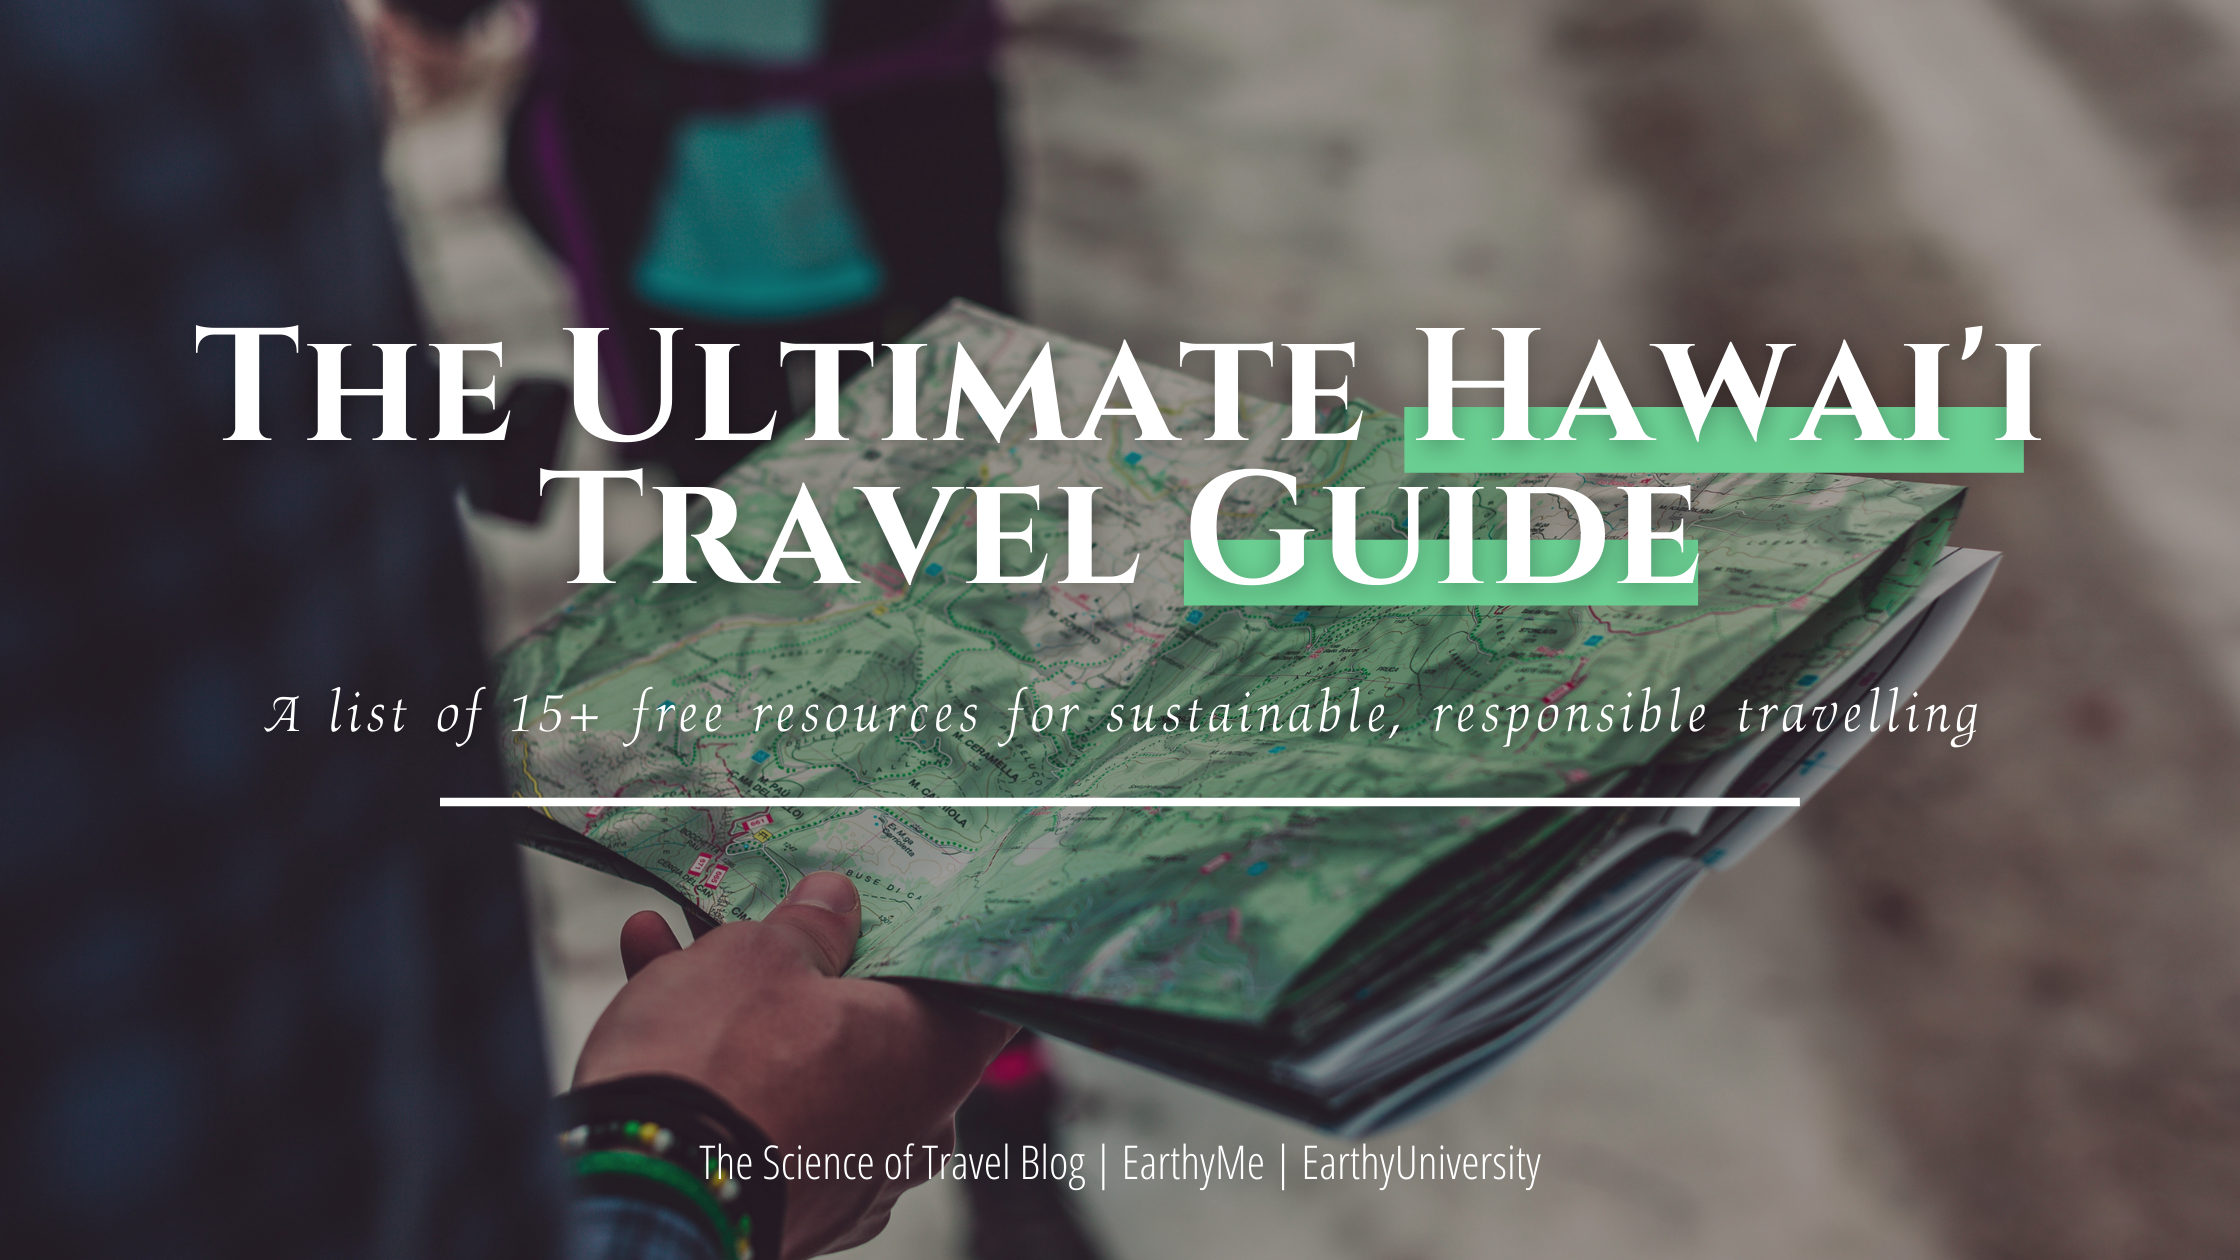 The Ultimate Hawai'i Travel Guide is a list that consists of over 15 resources that promote and encourage more sustainable, responsible travelling by emphasizing the importance of an emotional connection with the Hawaiian Islands. By gaining knowledge about Hawai'i we can create a holistic view and, hence, wholesome travel experience.